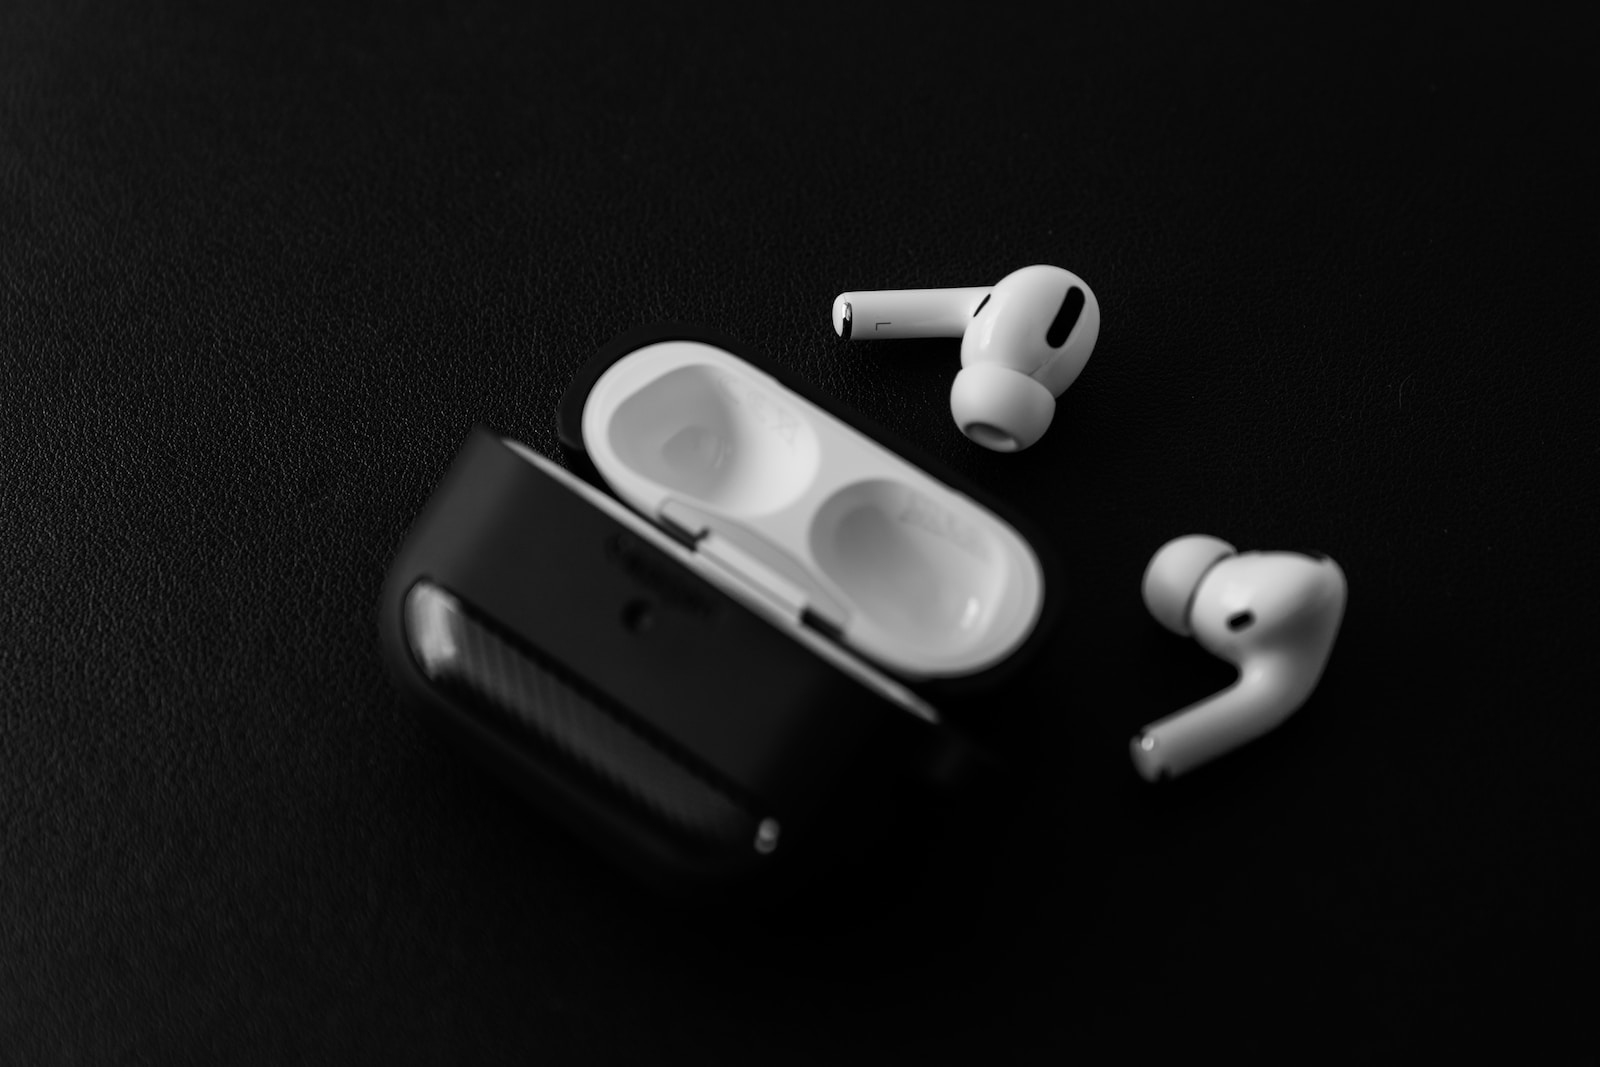 
How to Record Audio with Your AirPods: A Step-by-Step Guide